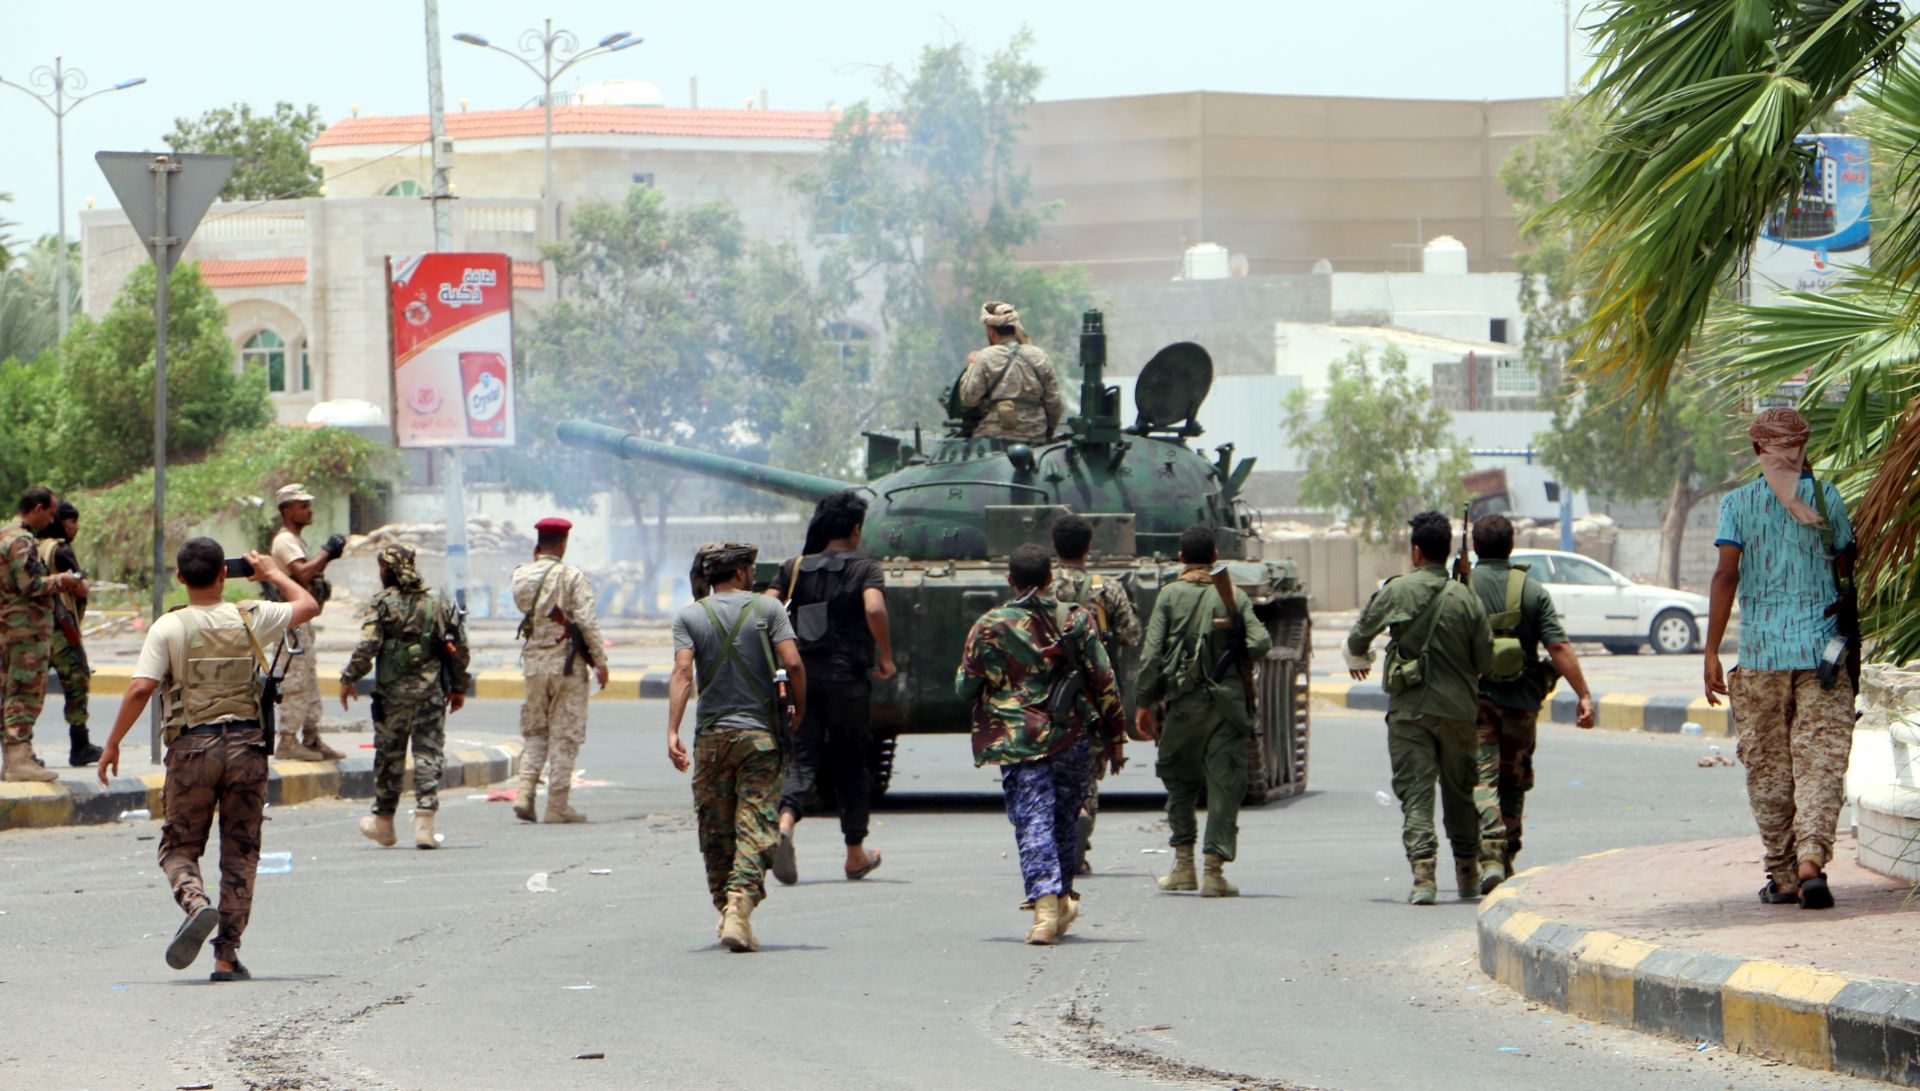 epa07766728 Armed members of a separatist southern group patrol a street during clashes with government forces in the southern port city of Aden, Yemen, 10 August 2019. According to reports, separatist forces in southern Yemen, backed by the United Arab Emirates, have seized all military bases belonging to the Saudi-backed Yemeni government in the southern city of Aden after four days of fighting between the two sides.  EPA/NAJEEB ALMAHBOOBI